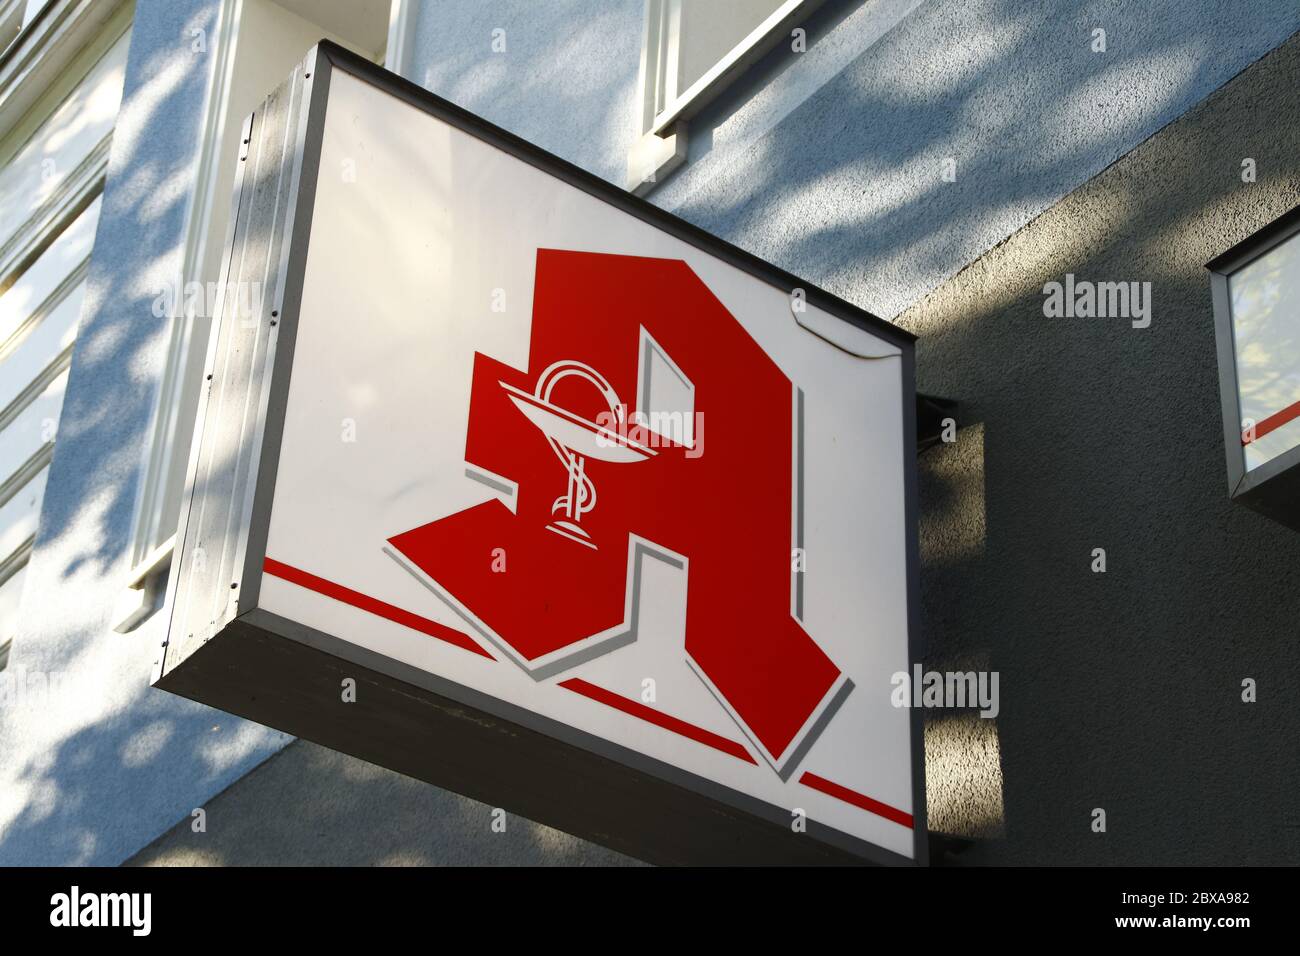 Berlin / Germany - April 22, 2020: Close up of an Apotheke sign (meaning pharmacy / apothecary). Bold, red A on white background. Stock Photo